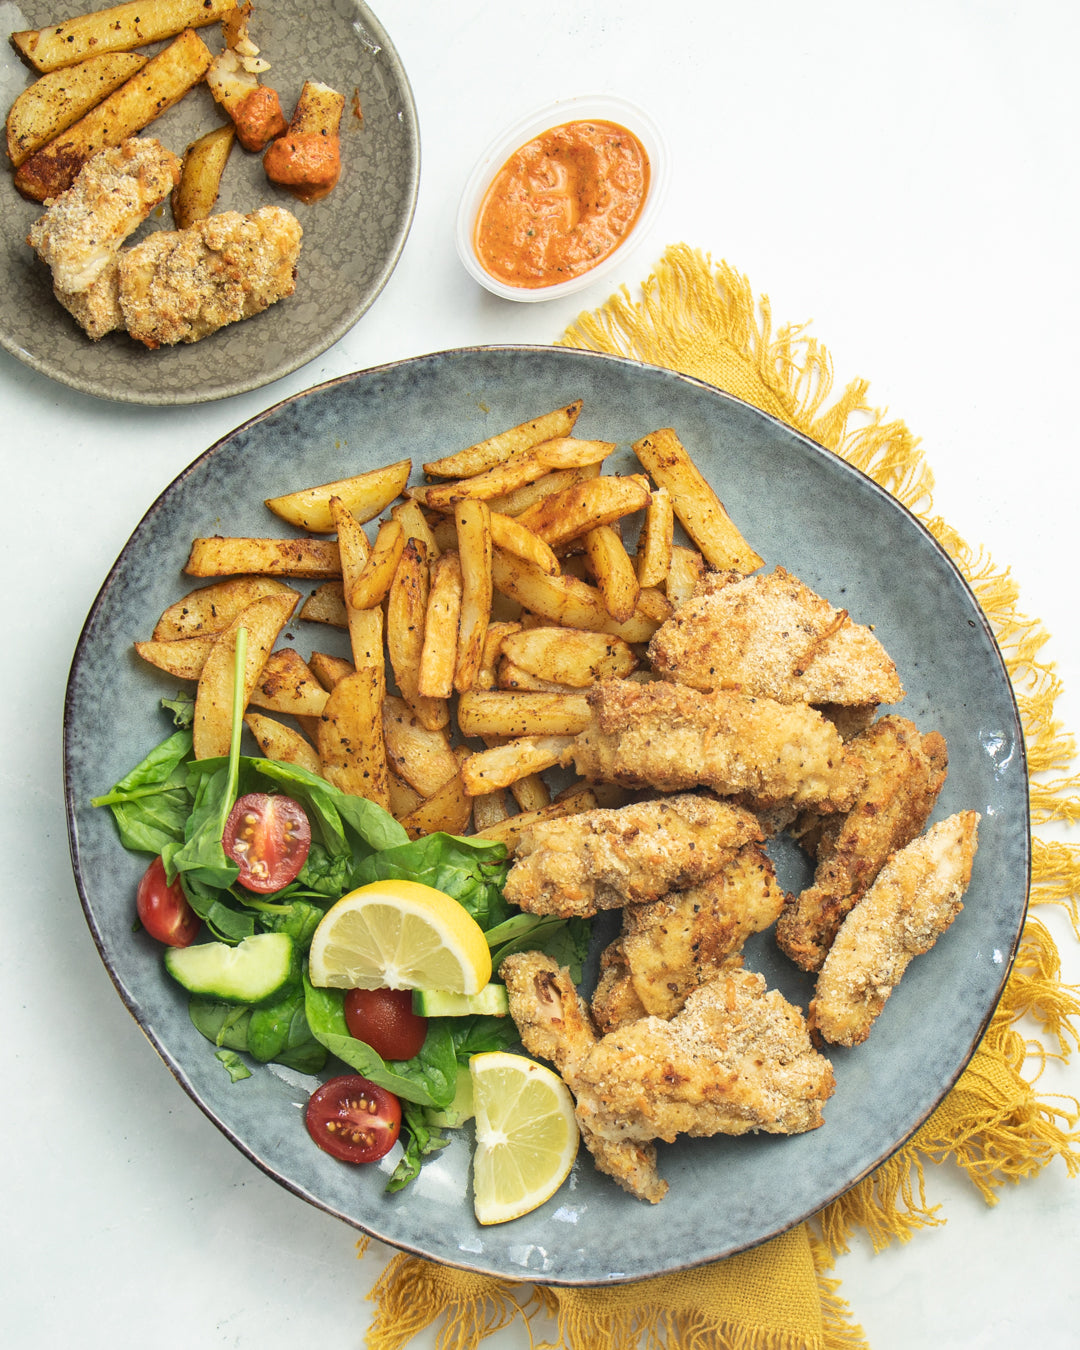 Homemade Chicken Fingers and Chips